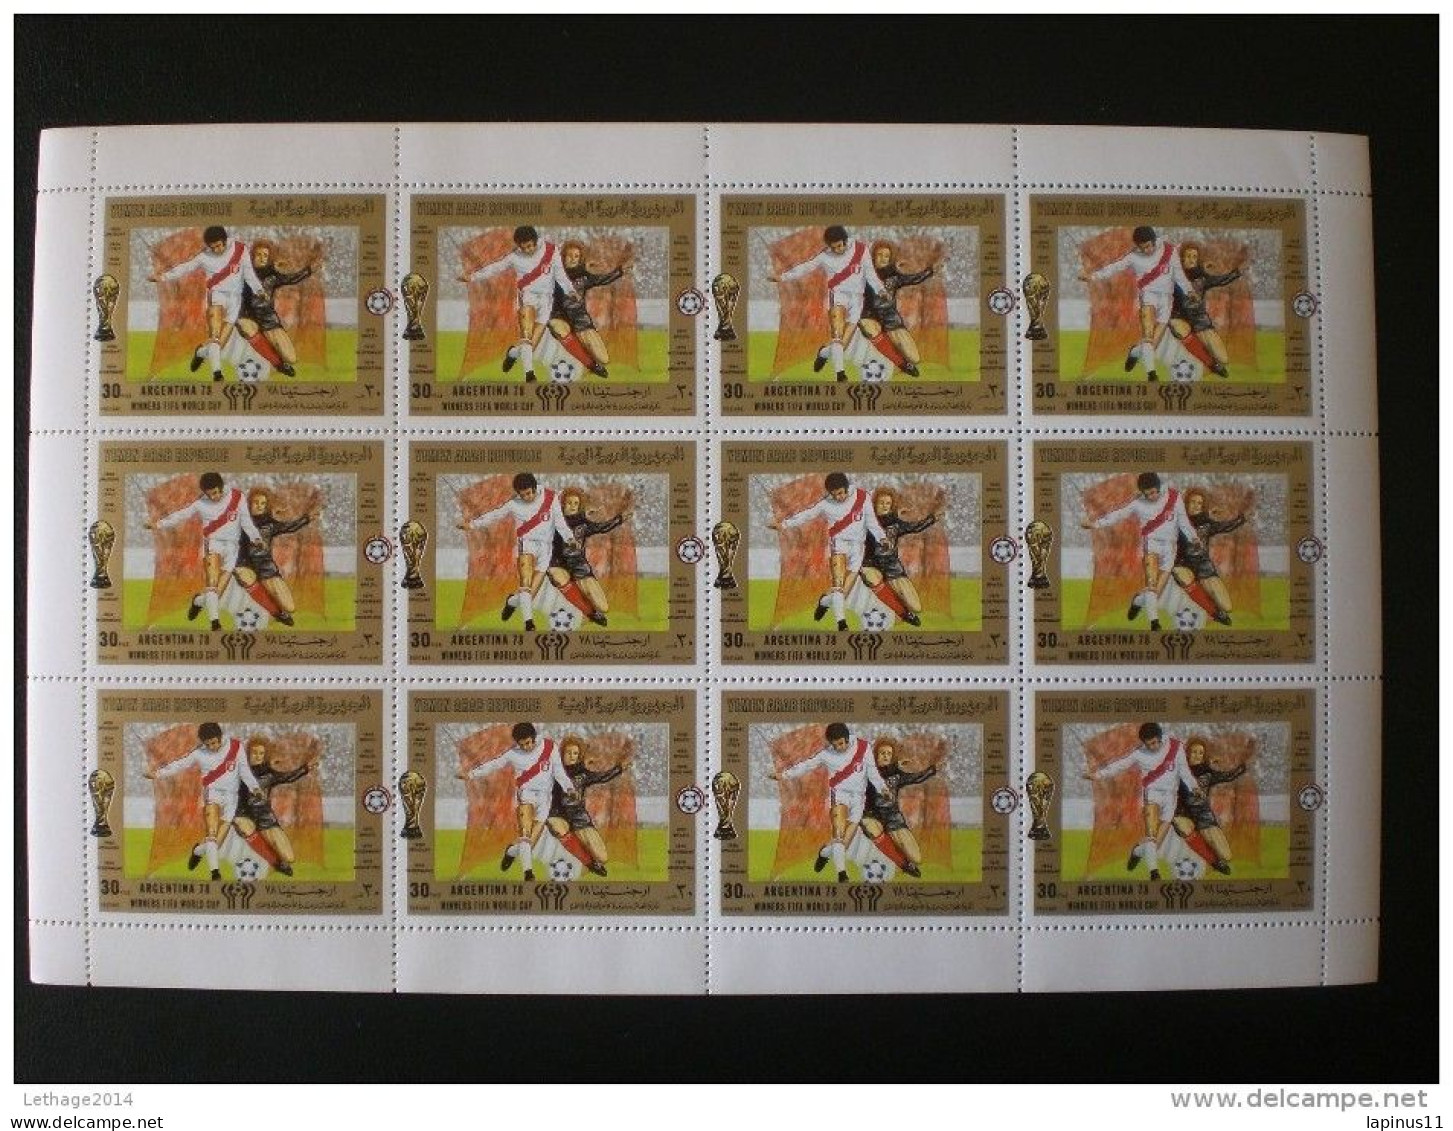 Yemen Rep."Argentina 78" Football World 12 Complete Mint Sets Never Hunting,complet,and 2 Block +9 PHOTO - Nuevos